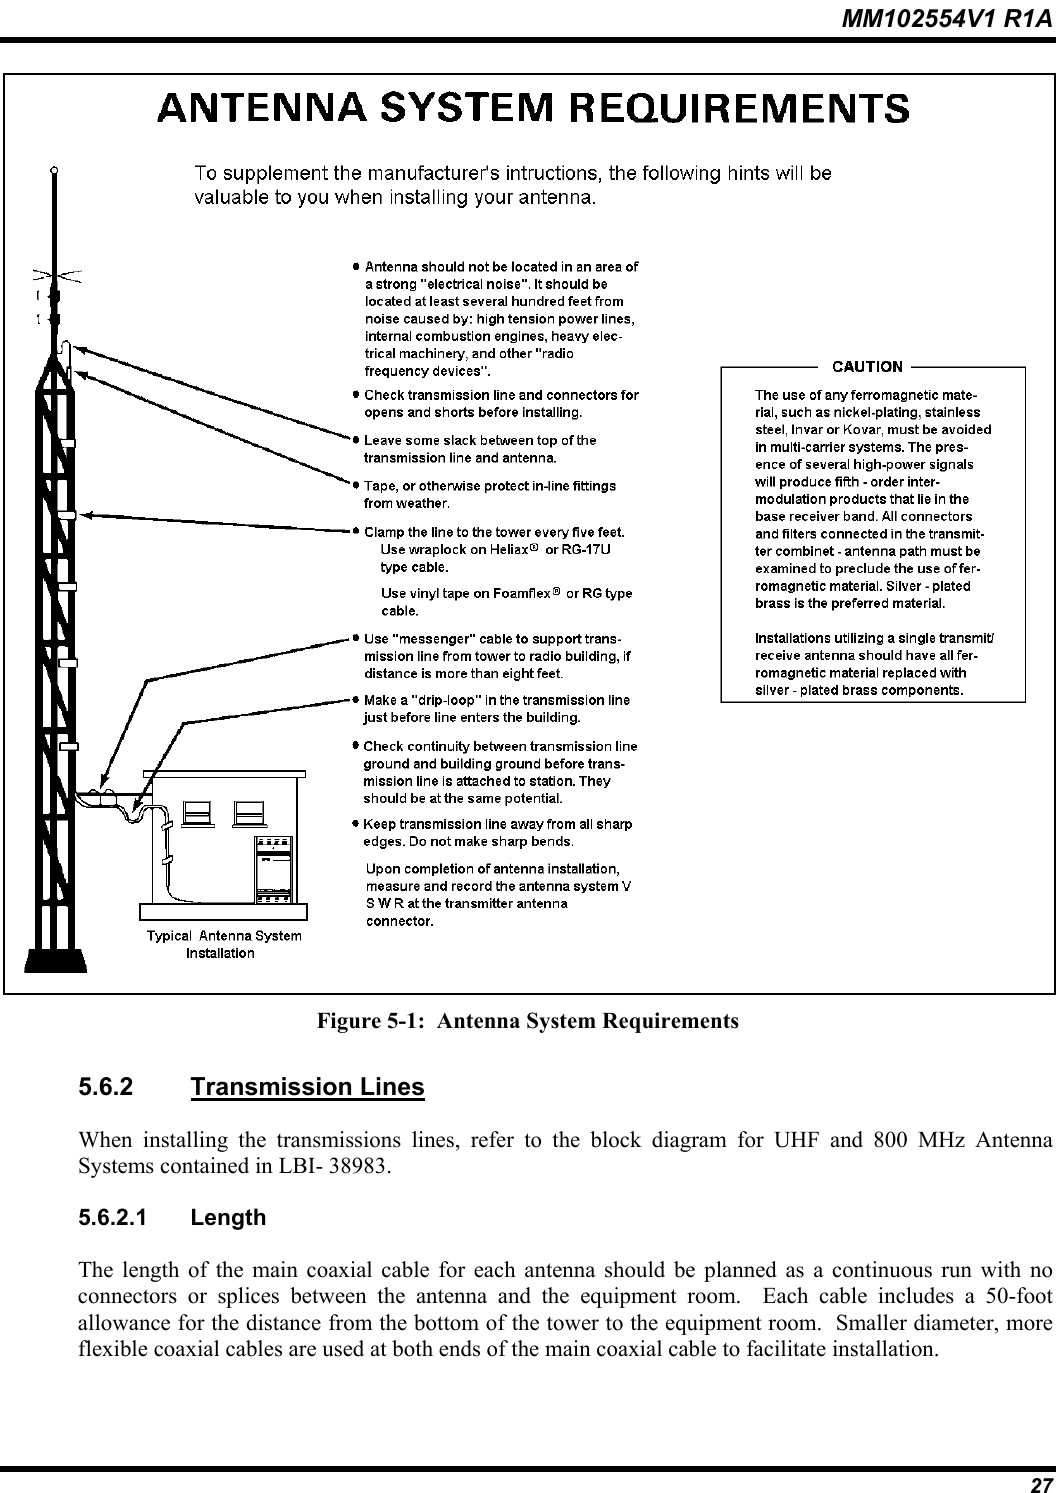 MM102554V1 R1A  27  Figure 5-1:  Antenna System Requirements 5.6.2 Transmission Lines When installing the transmissions lines, refer to the block diagram for UHF and 800 MHz Antenna Systems contained in LBI- 38983. 5.6.2.1 Length The length of the main coaxial cable for each antenna should be planned as a continuous run with no connectors or splices between the antenna and the equipment room.  Each cable includes a 50-foot allowance for the distance from the bottom of the tower to the equipment room.  Smaller diameter, more flexible coaxial cables are used at both ends of the main coaxial cable to facilitate installation. 